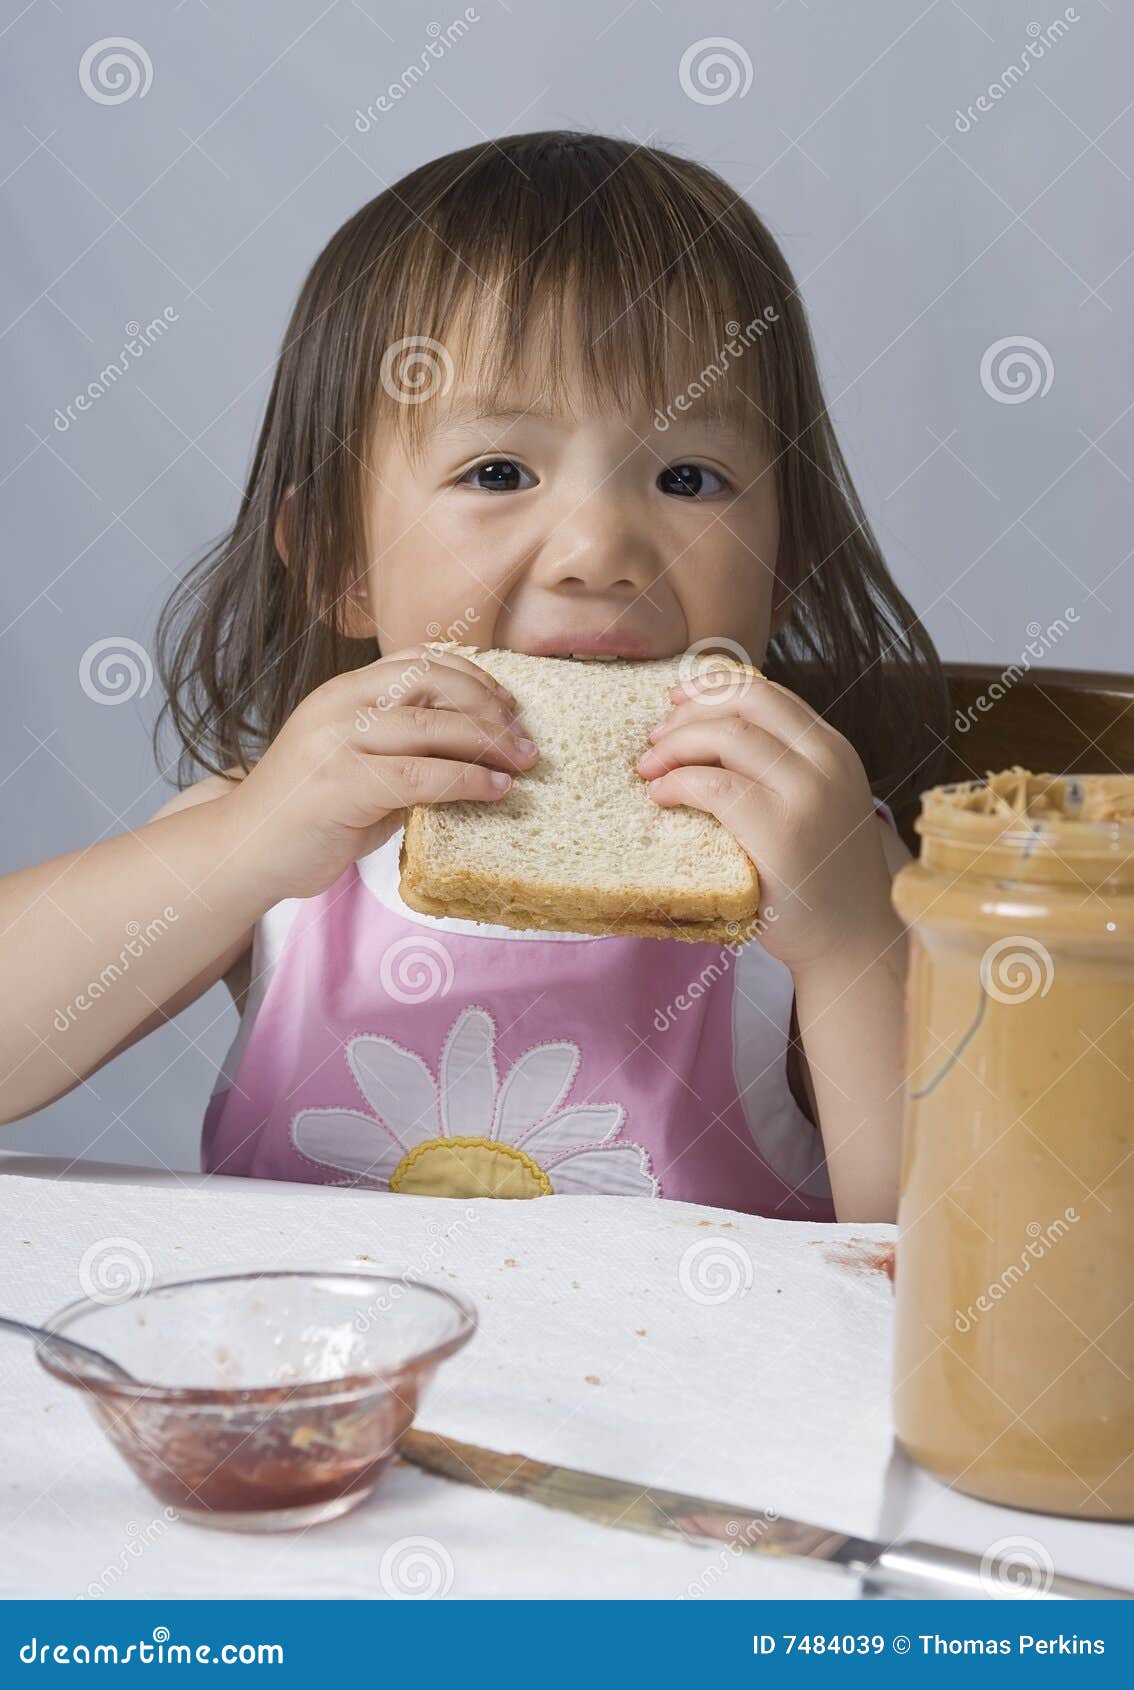 Peanut Butter And Jelly Stock Image Image Of Eating Youth 7484039